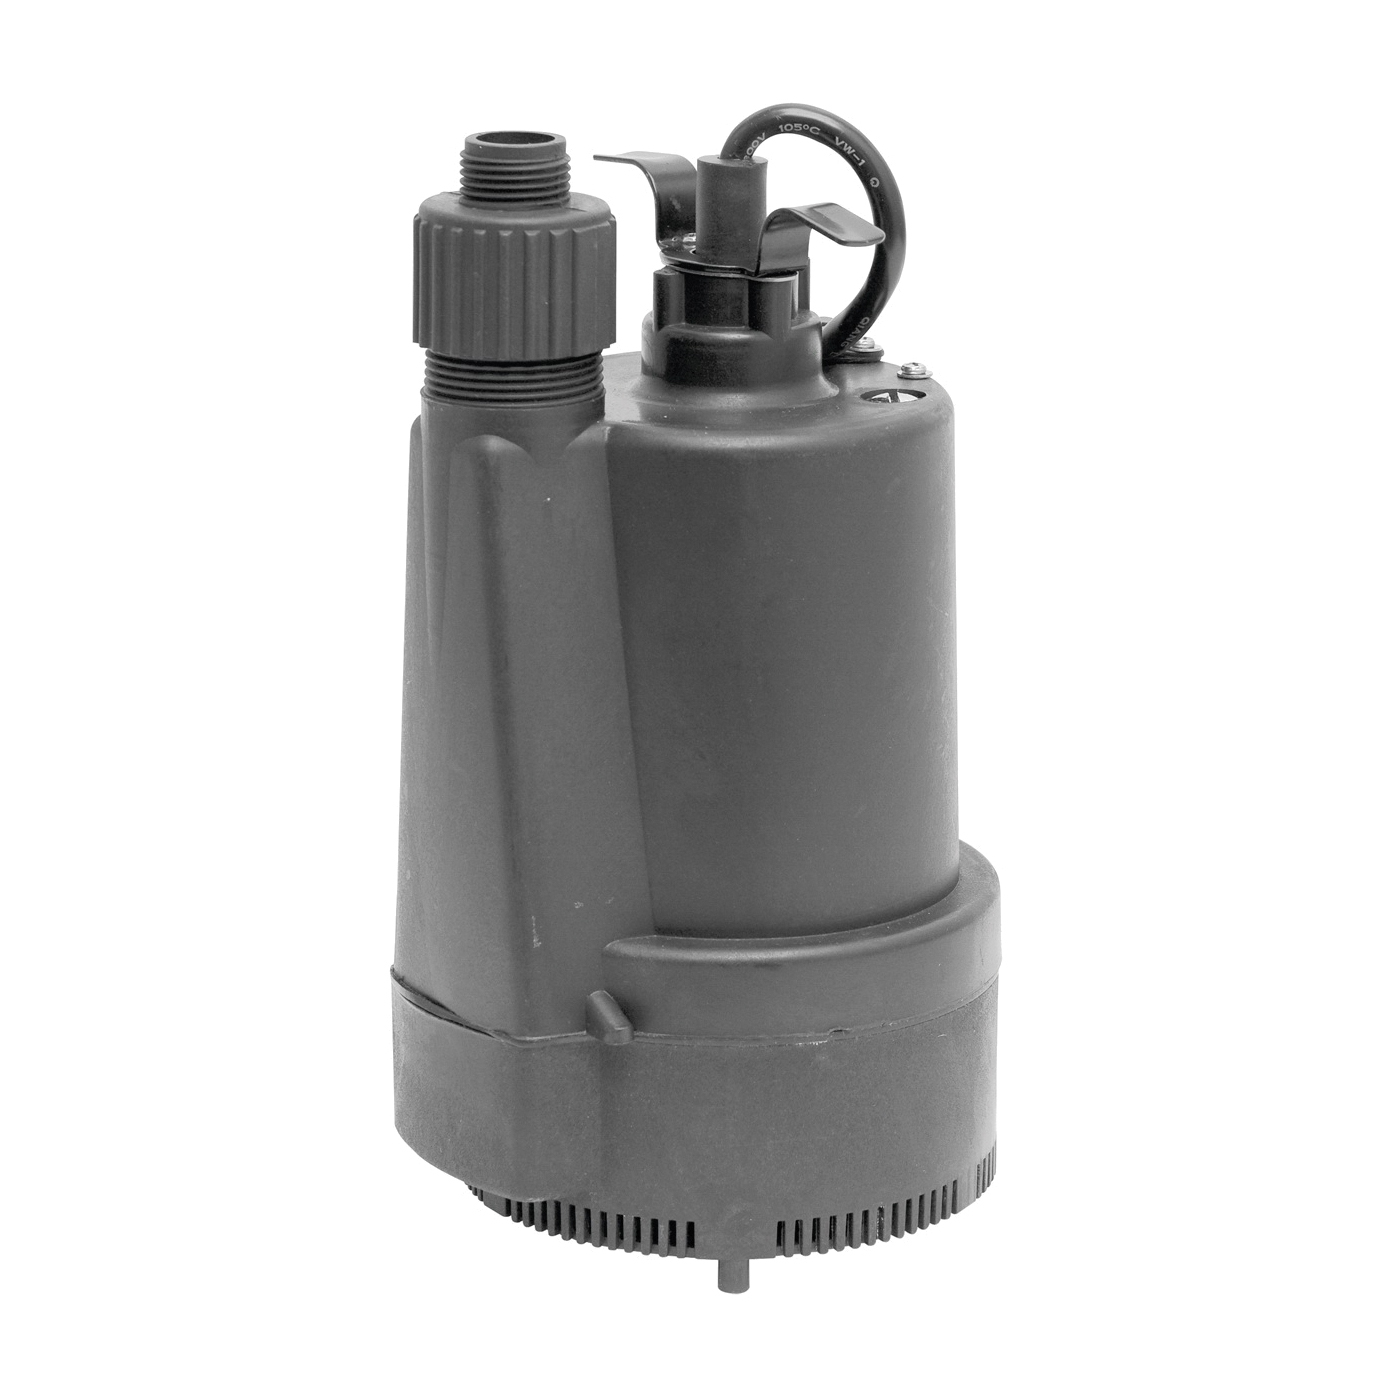 Superior Pump 91330 Submersible Utility Pump, 4.1 A, 120 V, 0.33 hp, 1-1/4 in Outlet, 40 gpm, Thermoplastic Impeller